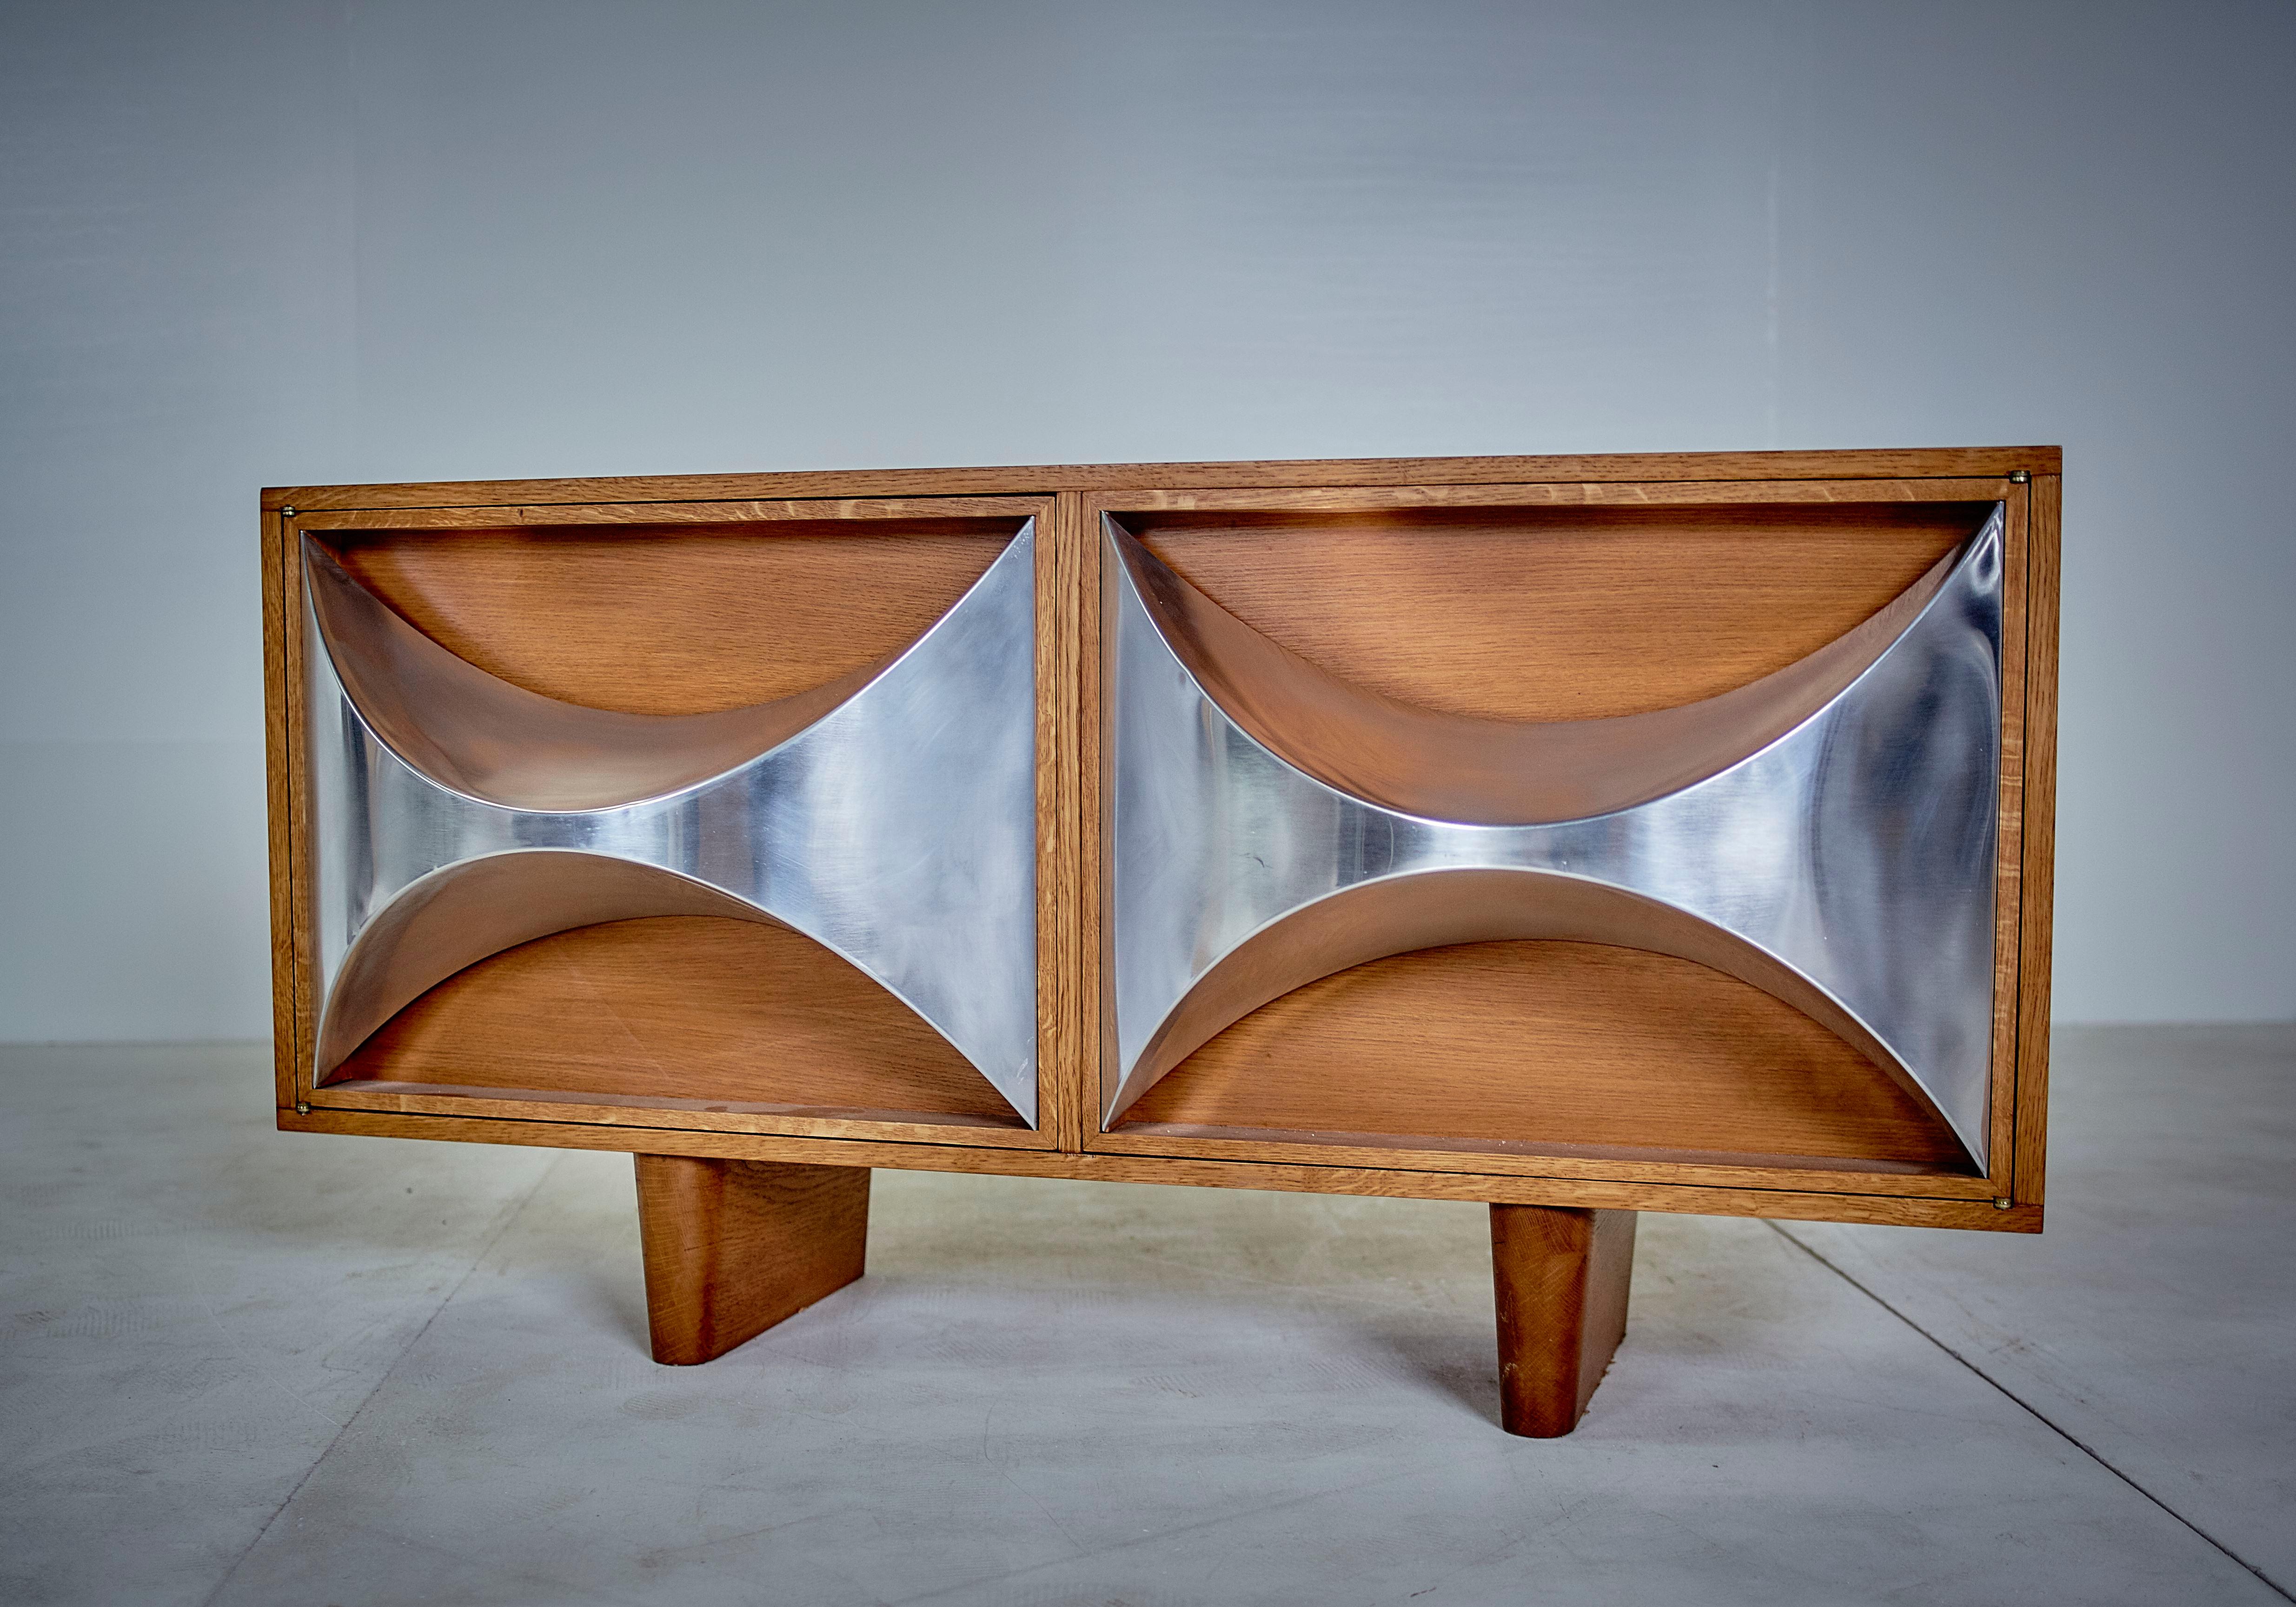 Raphaël Raffel (1912-2000)
Rare credenza, 1973, once housed in the archive room of the French minister of post office, Rue du Louvre, Paris.

Born in 1912, Raphaël Raffel was an inexhaustible decorator.
After studying at the Beaux-Arts, Raphaël